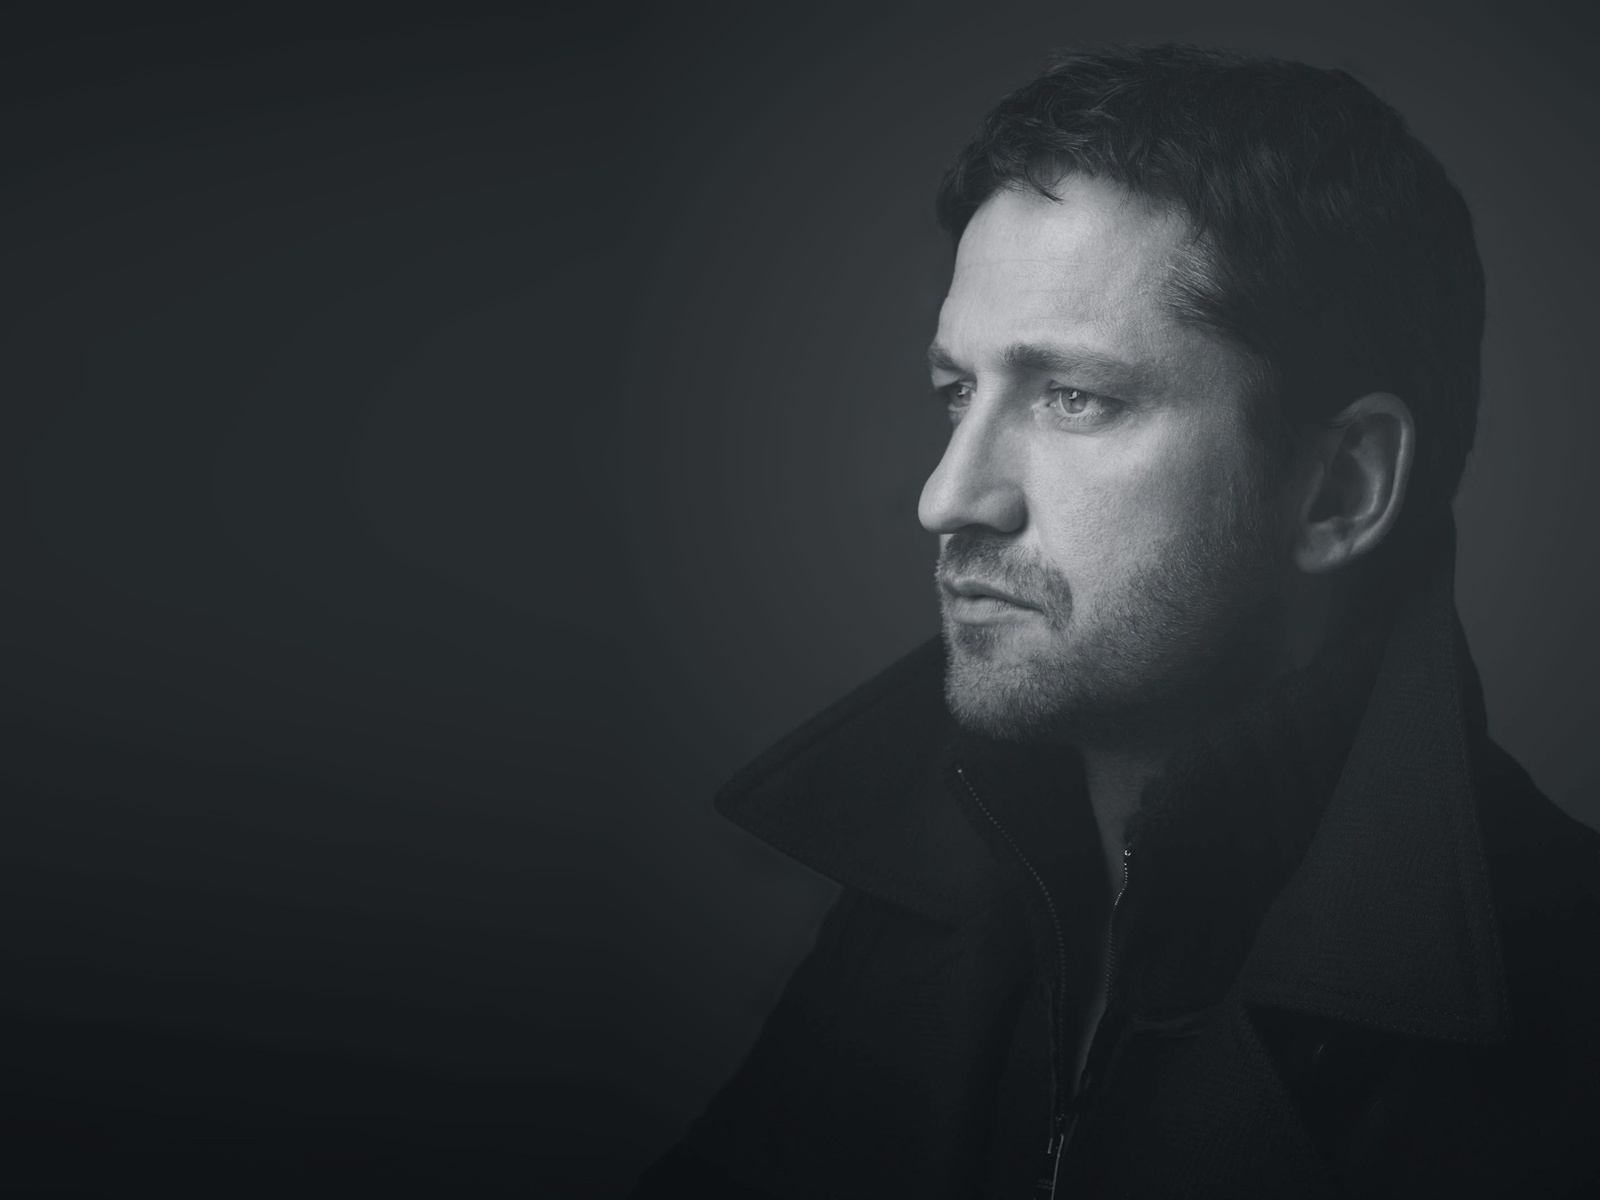 Thoughtful Gerard Butler for 1600 x 1200 resolution